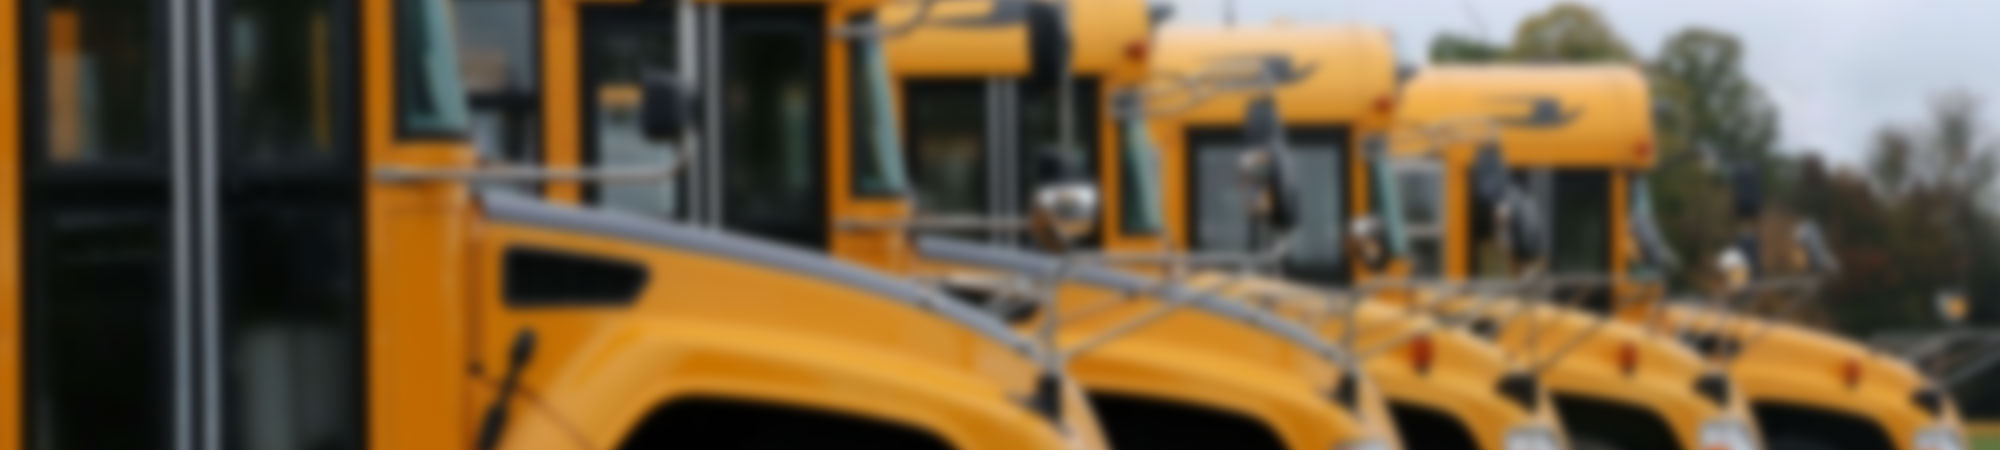 Blurred photo of a yellow school bus driving down a rural country road in fall